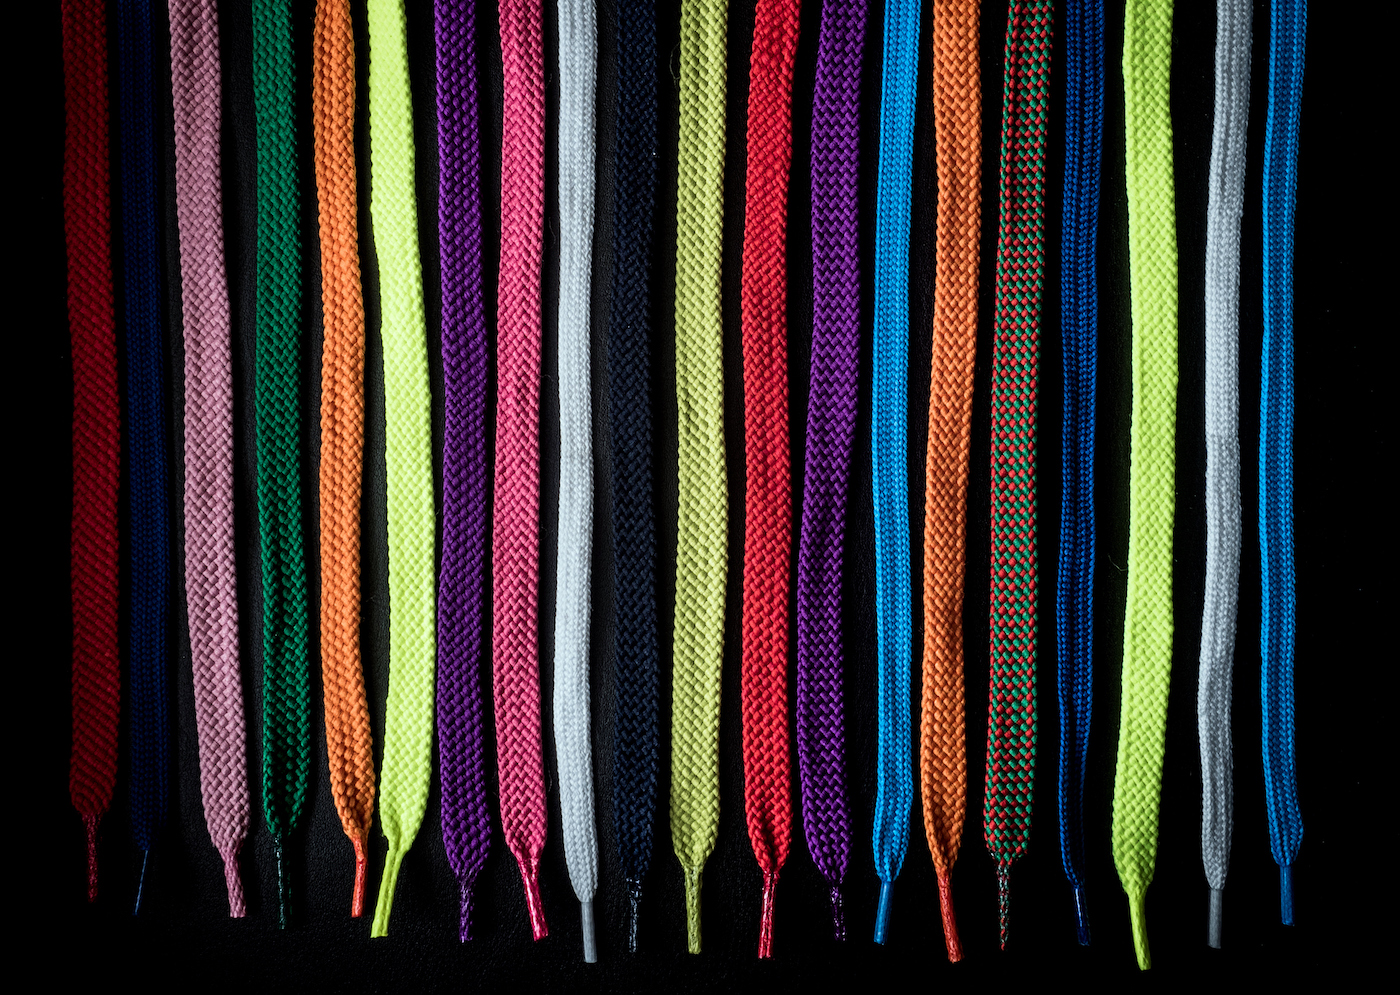 Close-Up Of Multi Colored Shoelaces Against Black Background